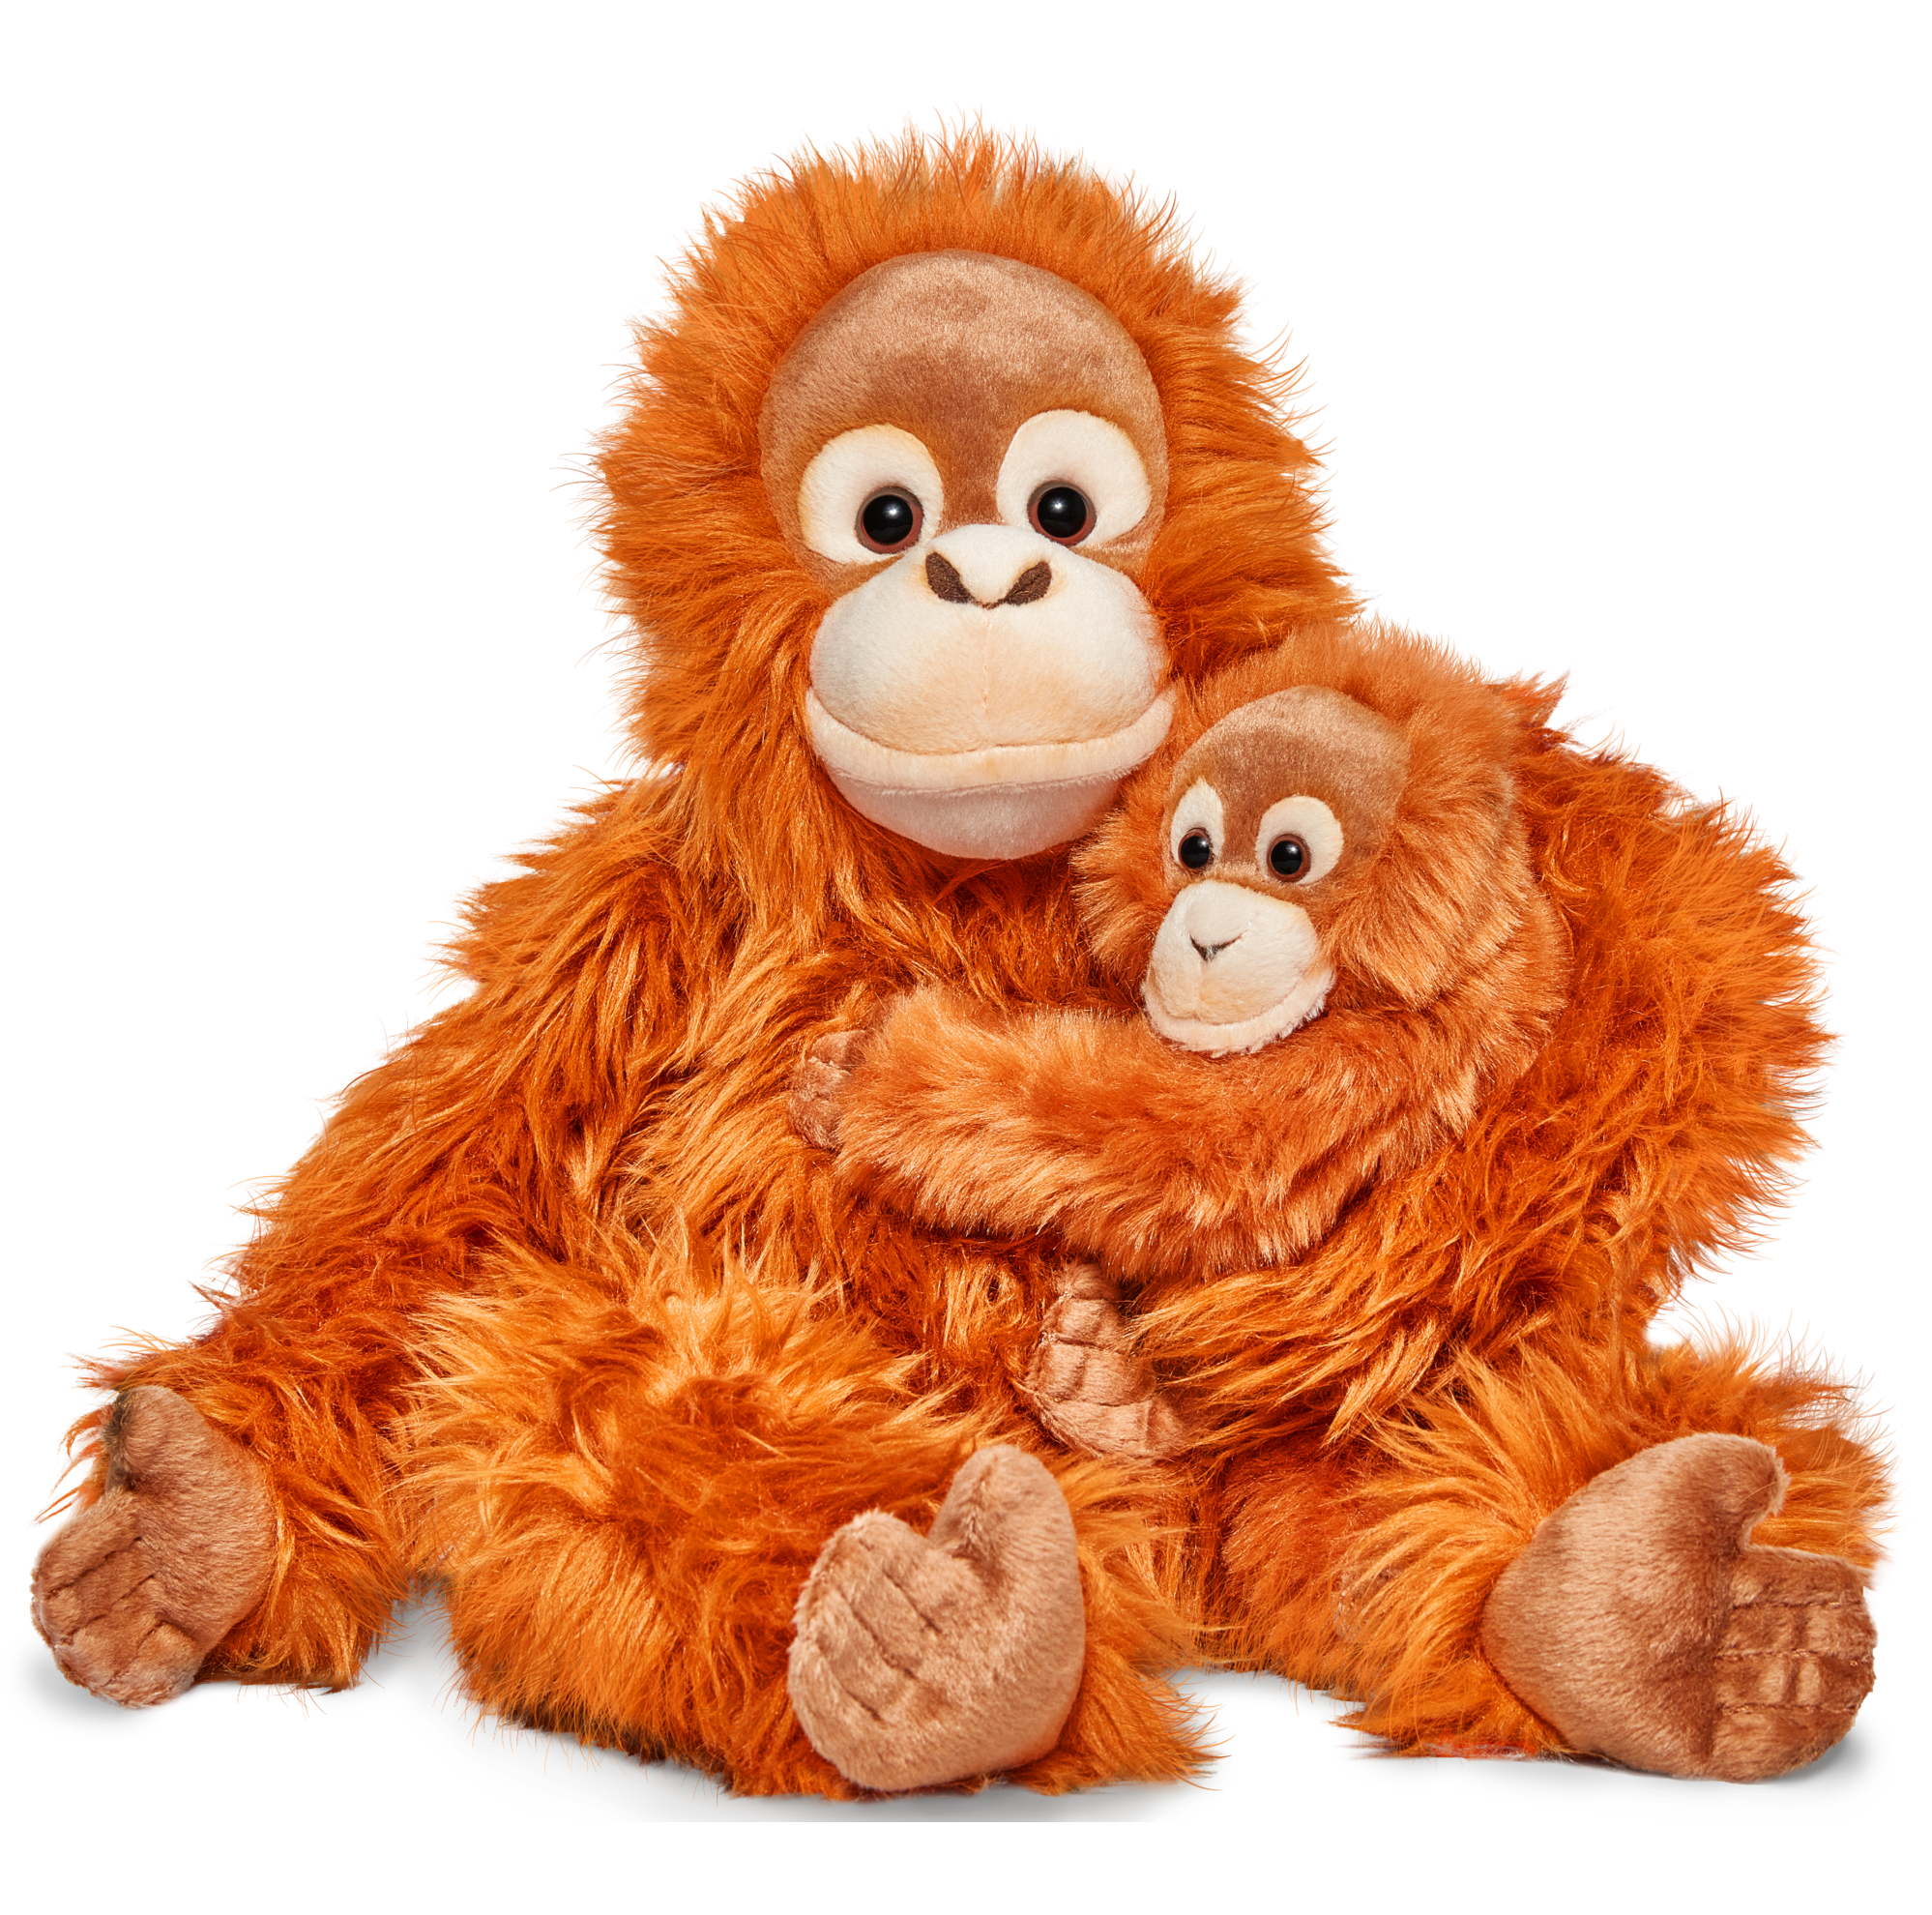 A picture of the orangutan mother and baby plush toys